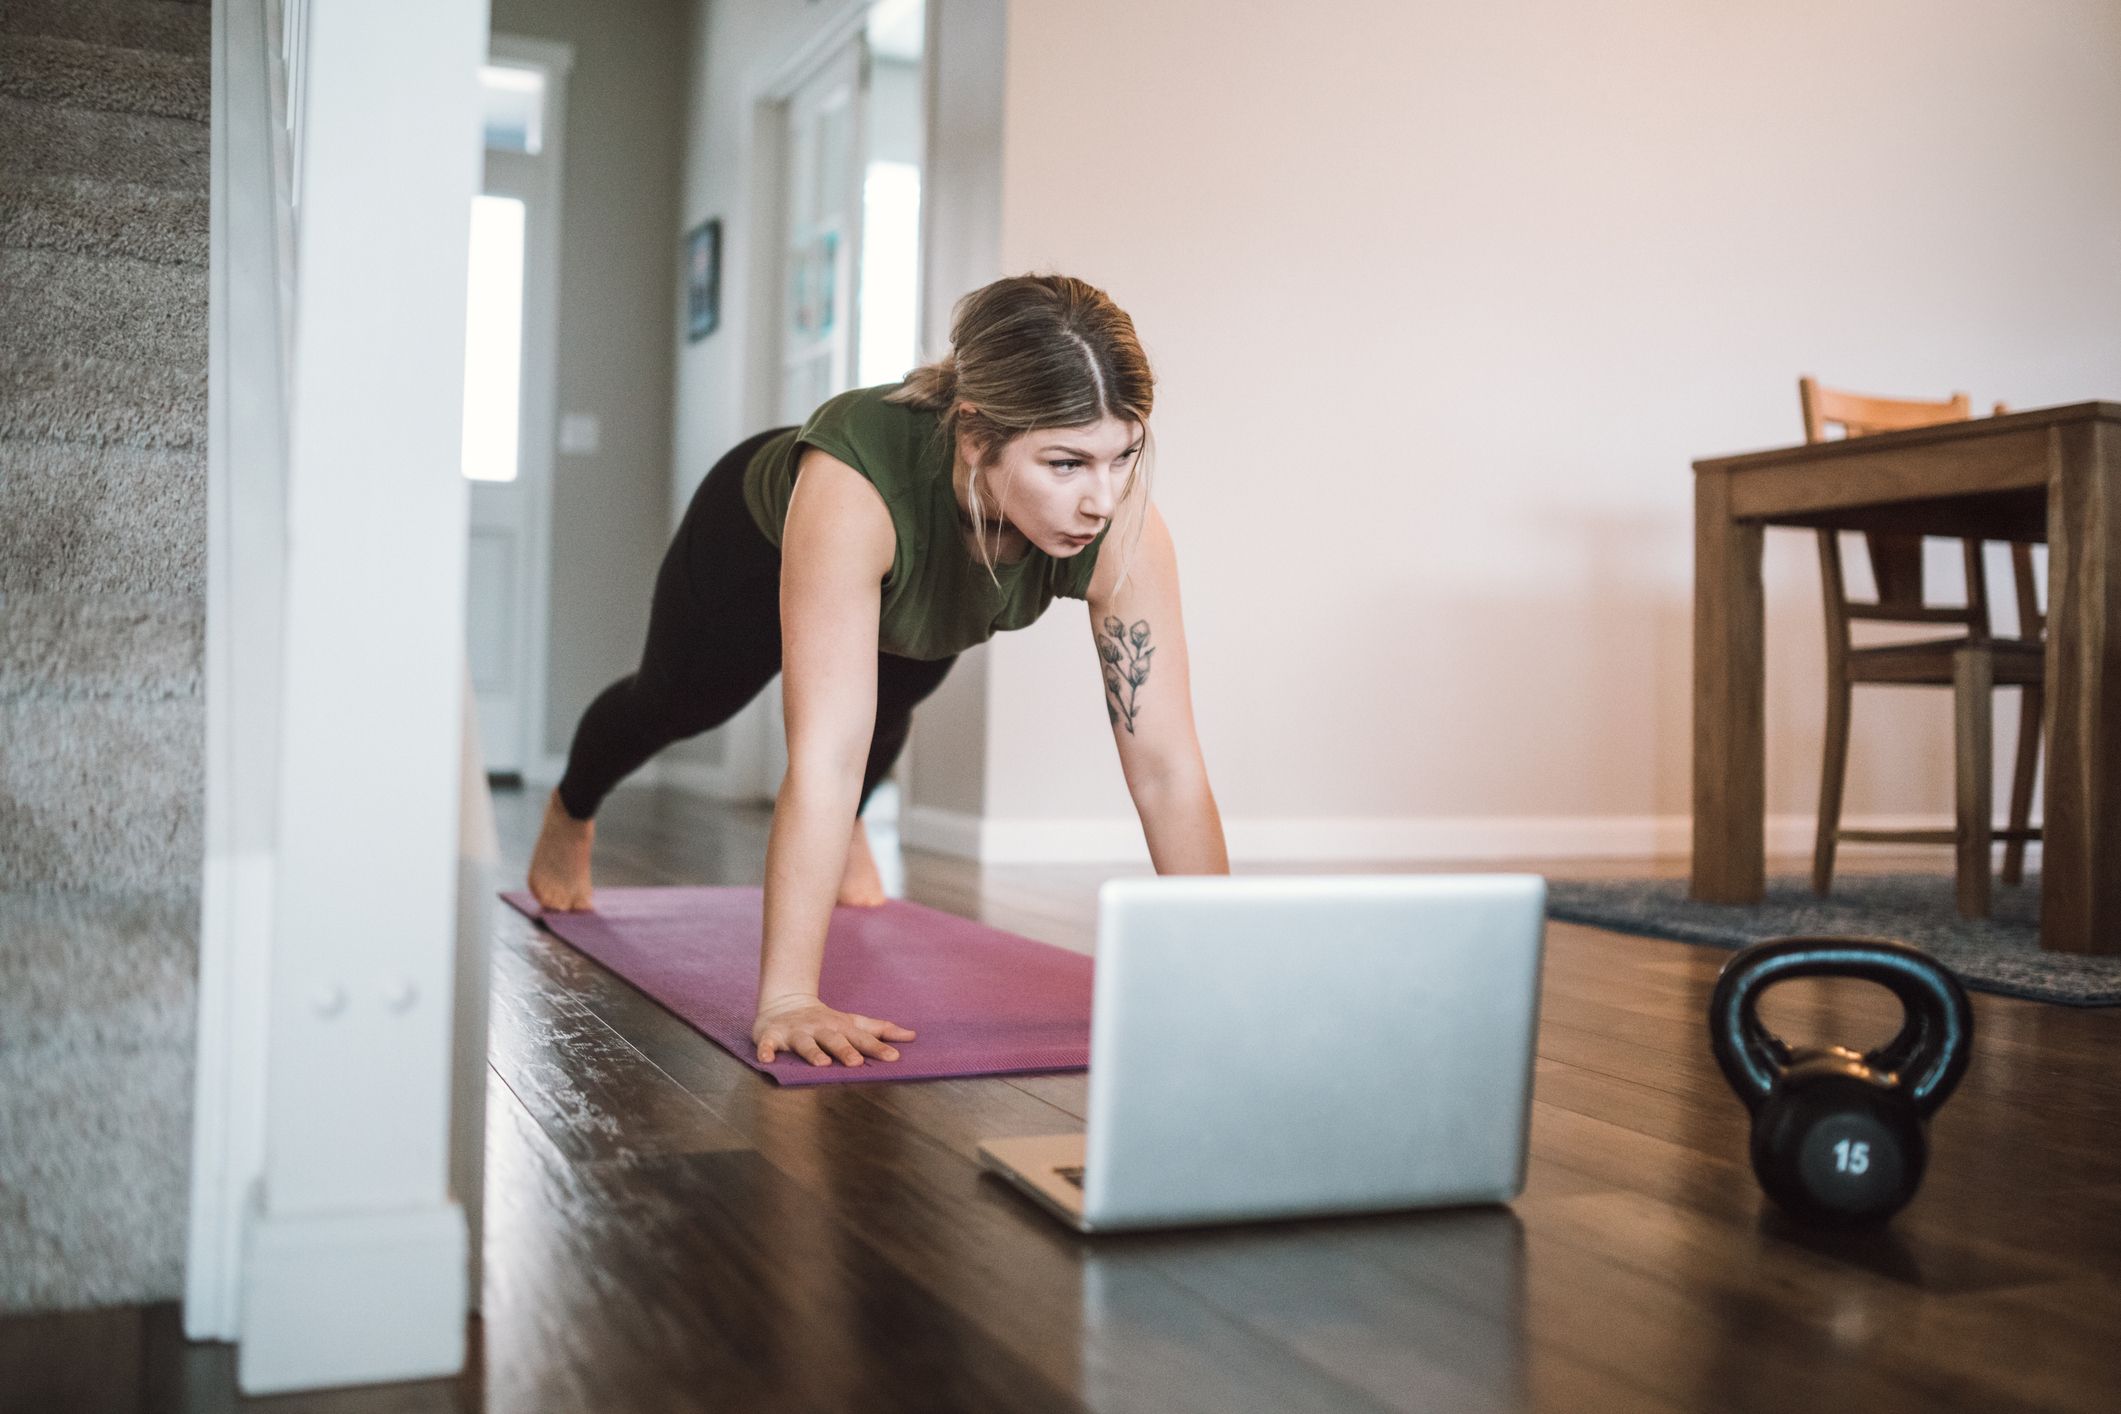 15 CrossFit Workouts You Do At Home With Minimal